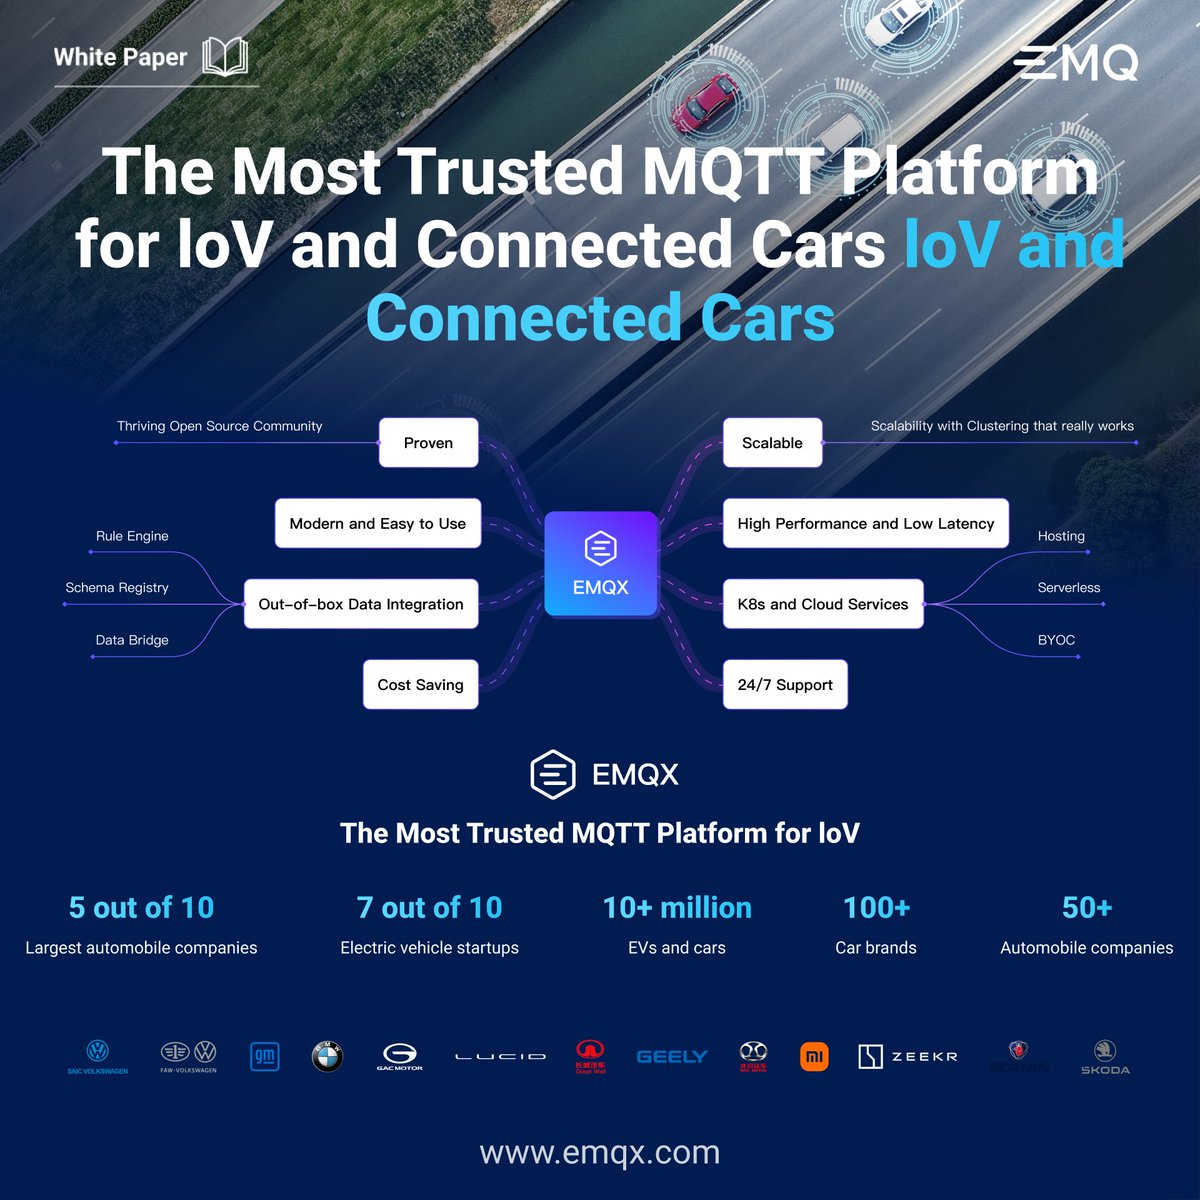 🚗 Rev up for the #automotive revolution with #MQTT and #EMQXPlatform!

■ Learn why MQTT is the industry standard and EMQX is the premier choice for #connectedcars. 

Download Now ⬇️
💻 shorturl.at/cflyC

#IoV #VehicleTracking #ConnectedVehicles